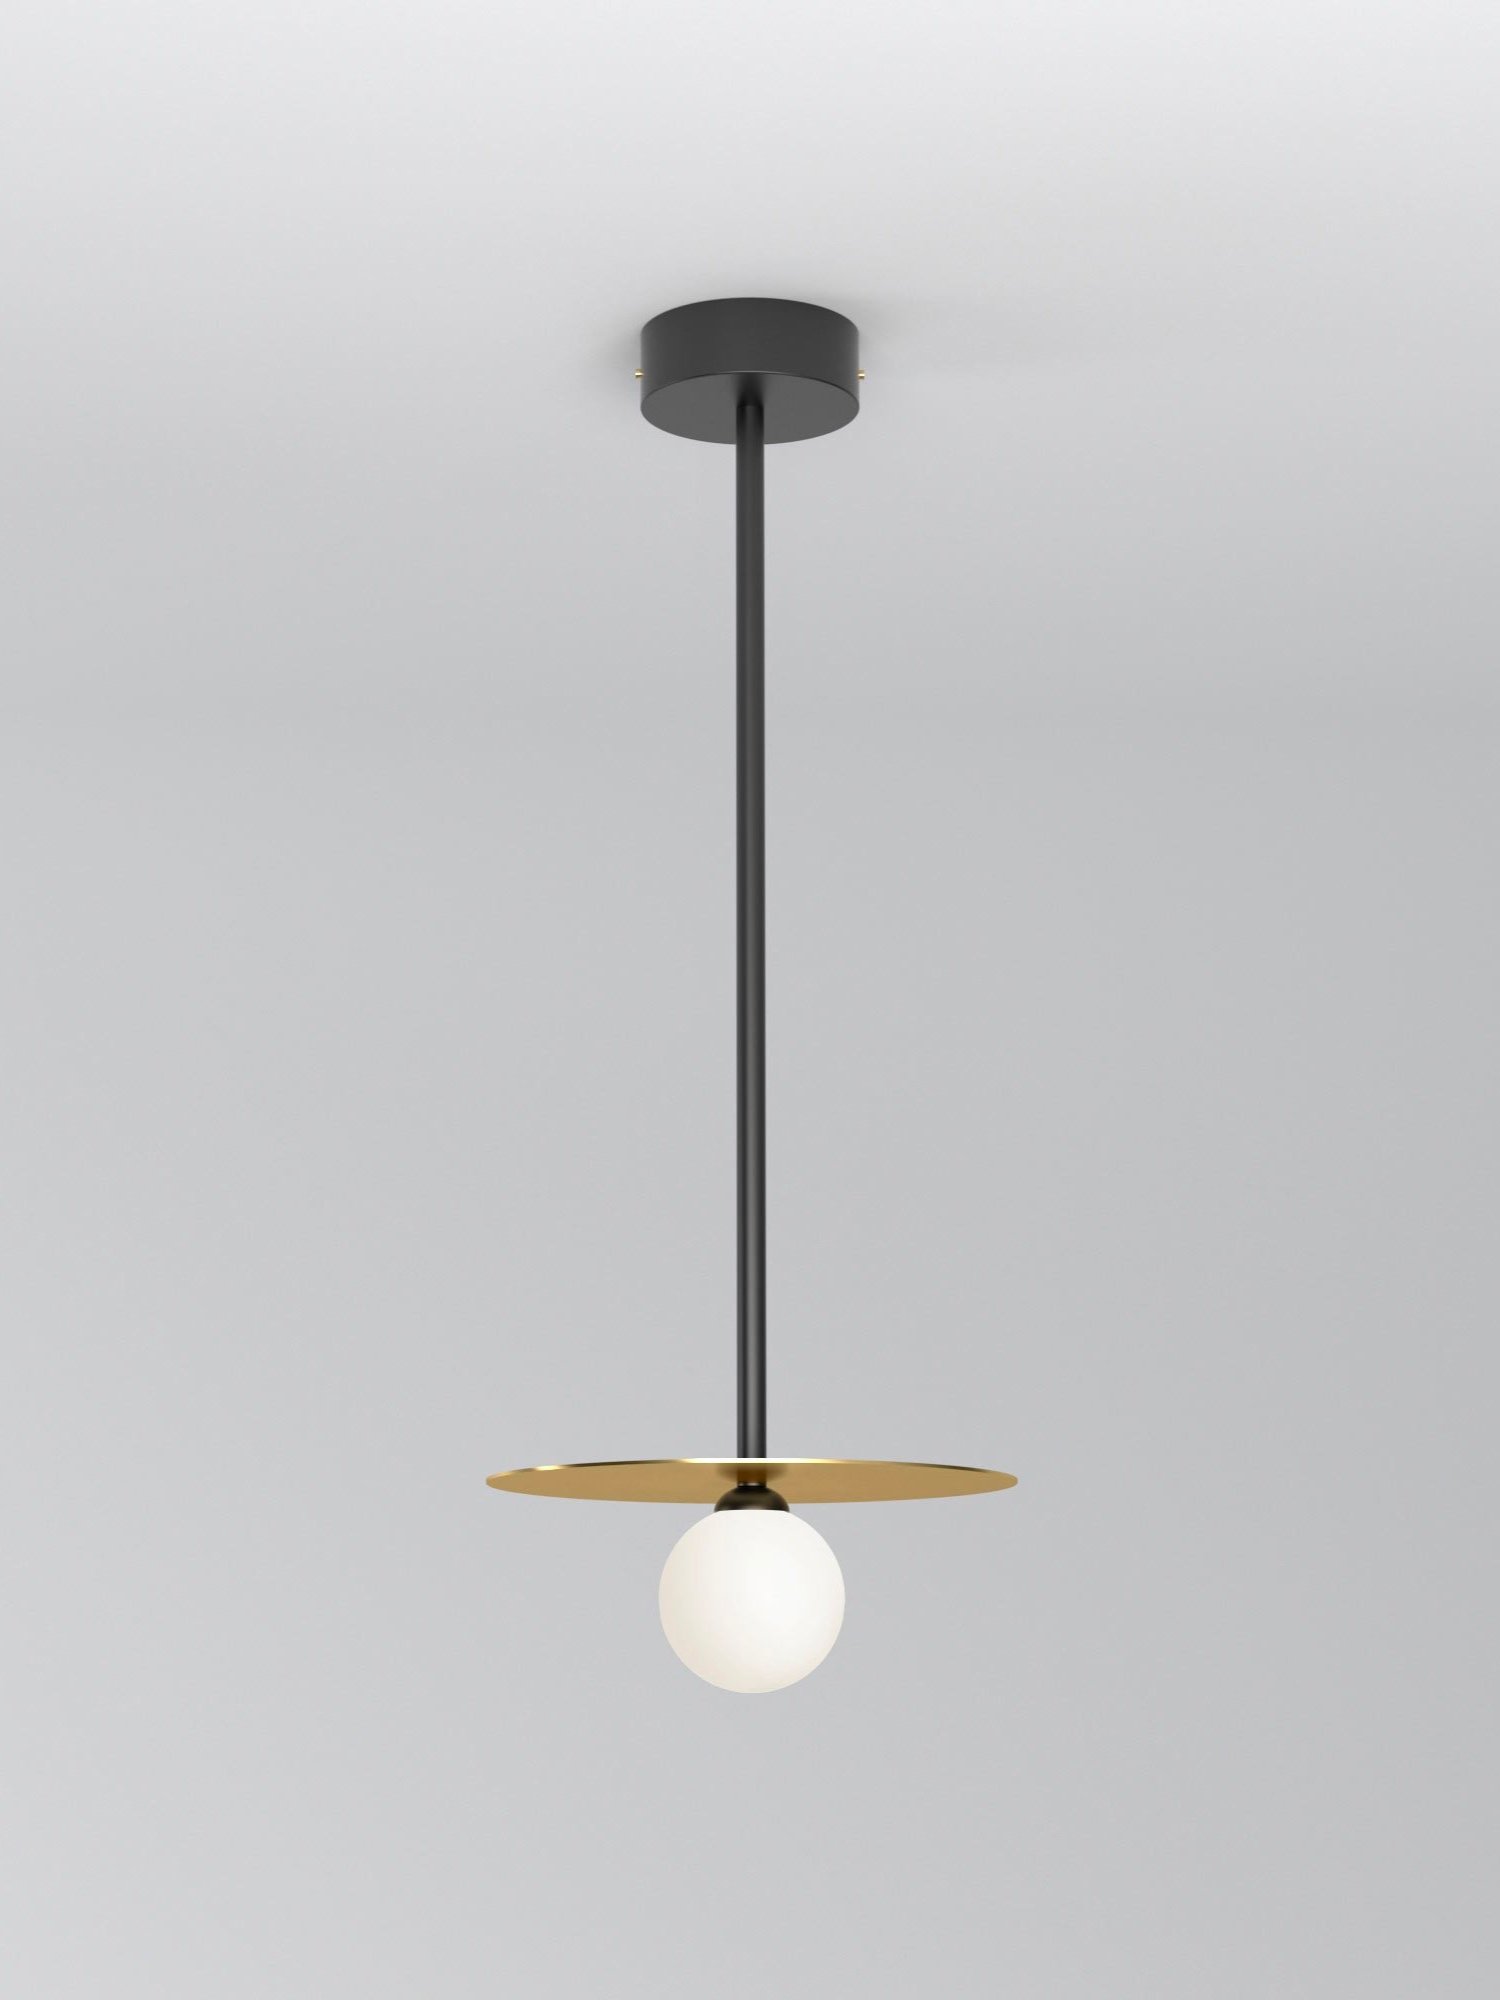 DISC AND SPHERE PENDANT LIGHT / HORIZONTAL / METAL TUBE / PILL BOX 38mm ATTACHMENT 